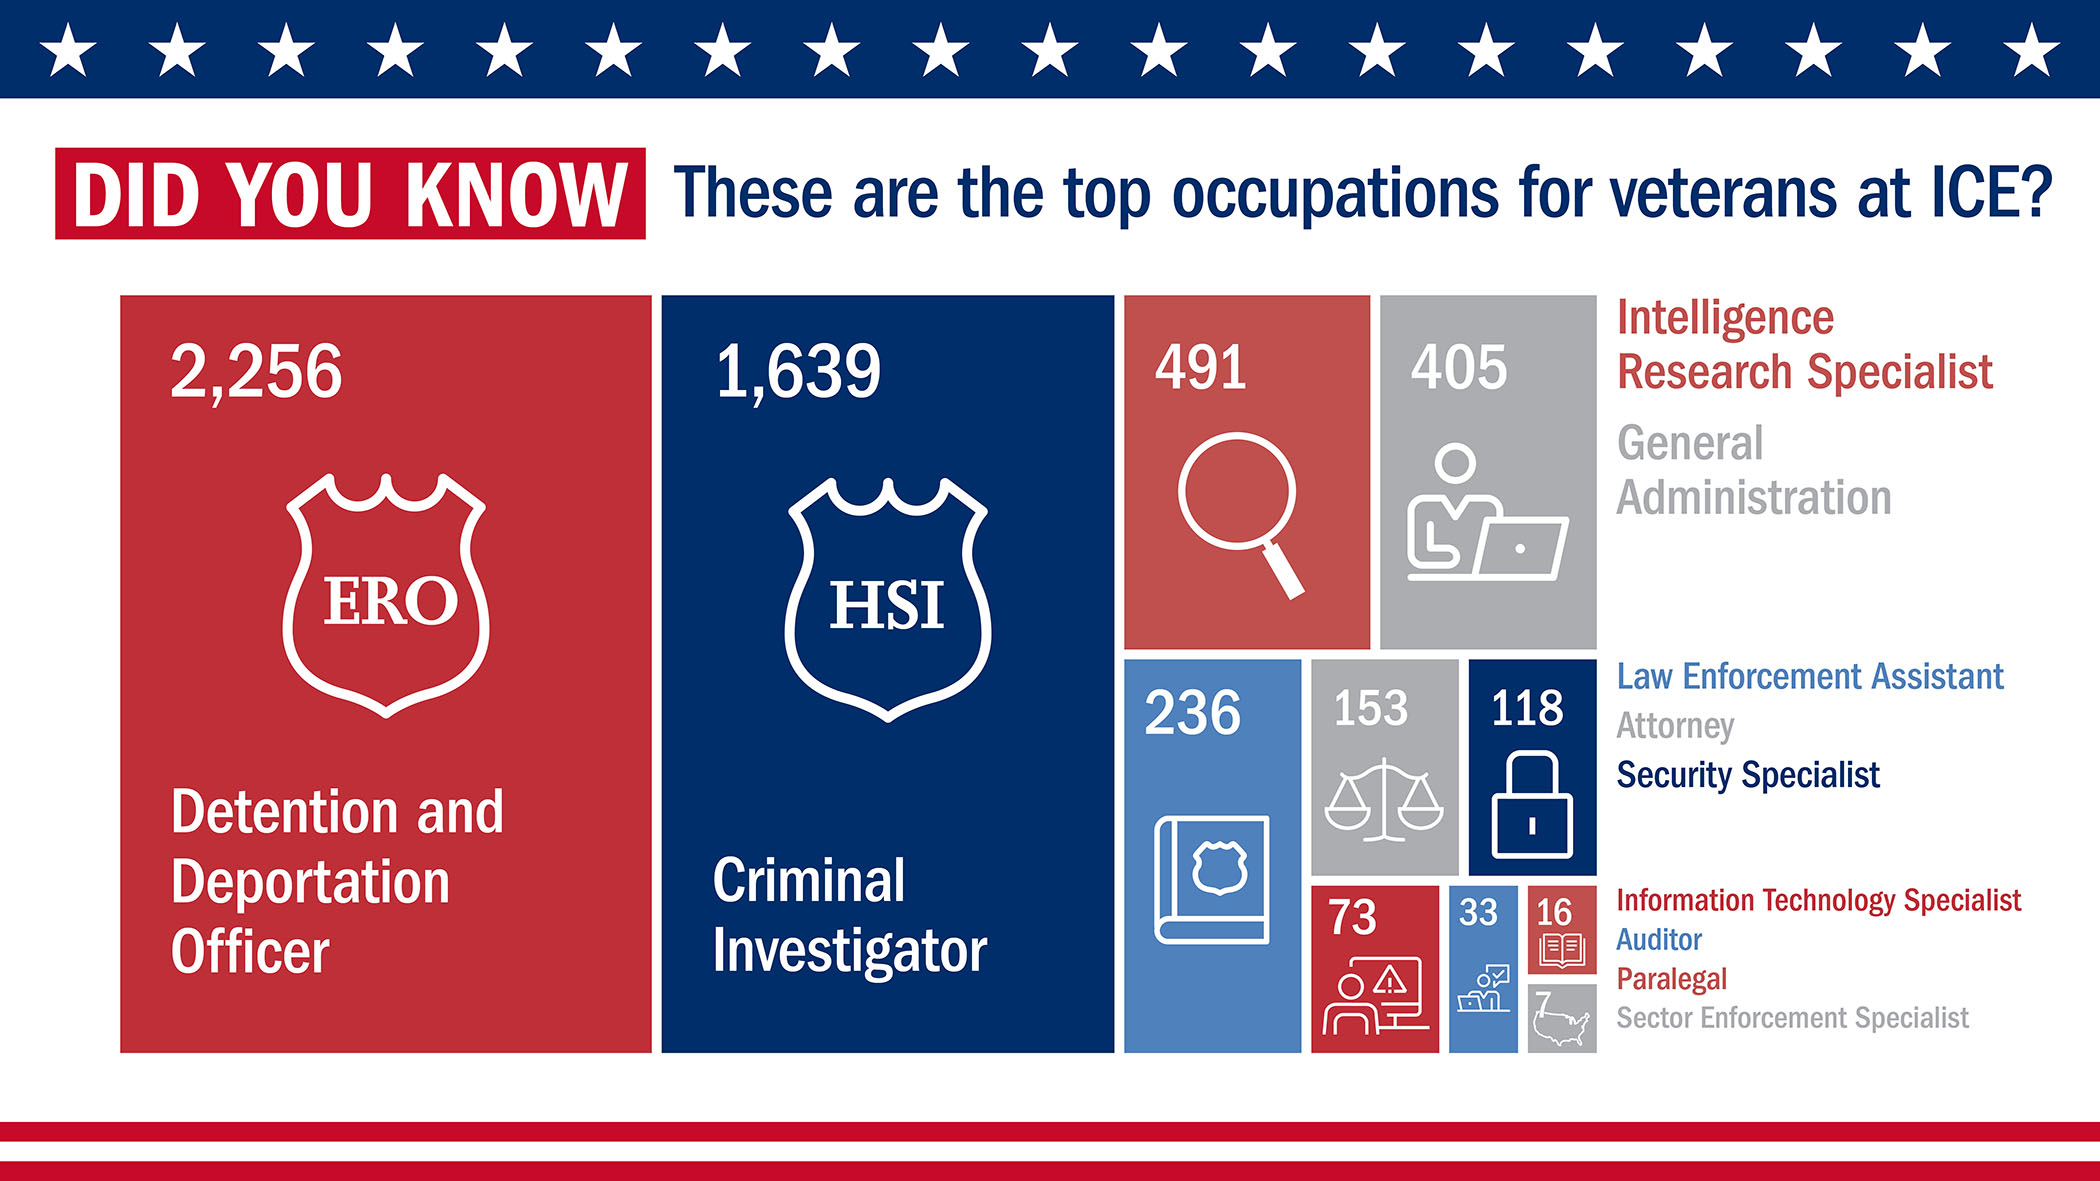 Did You Know: These are the top occupations for veterans at ICE?